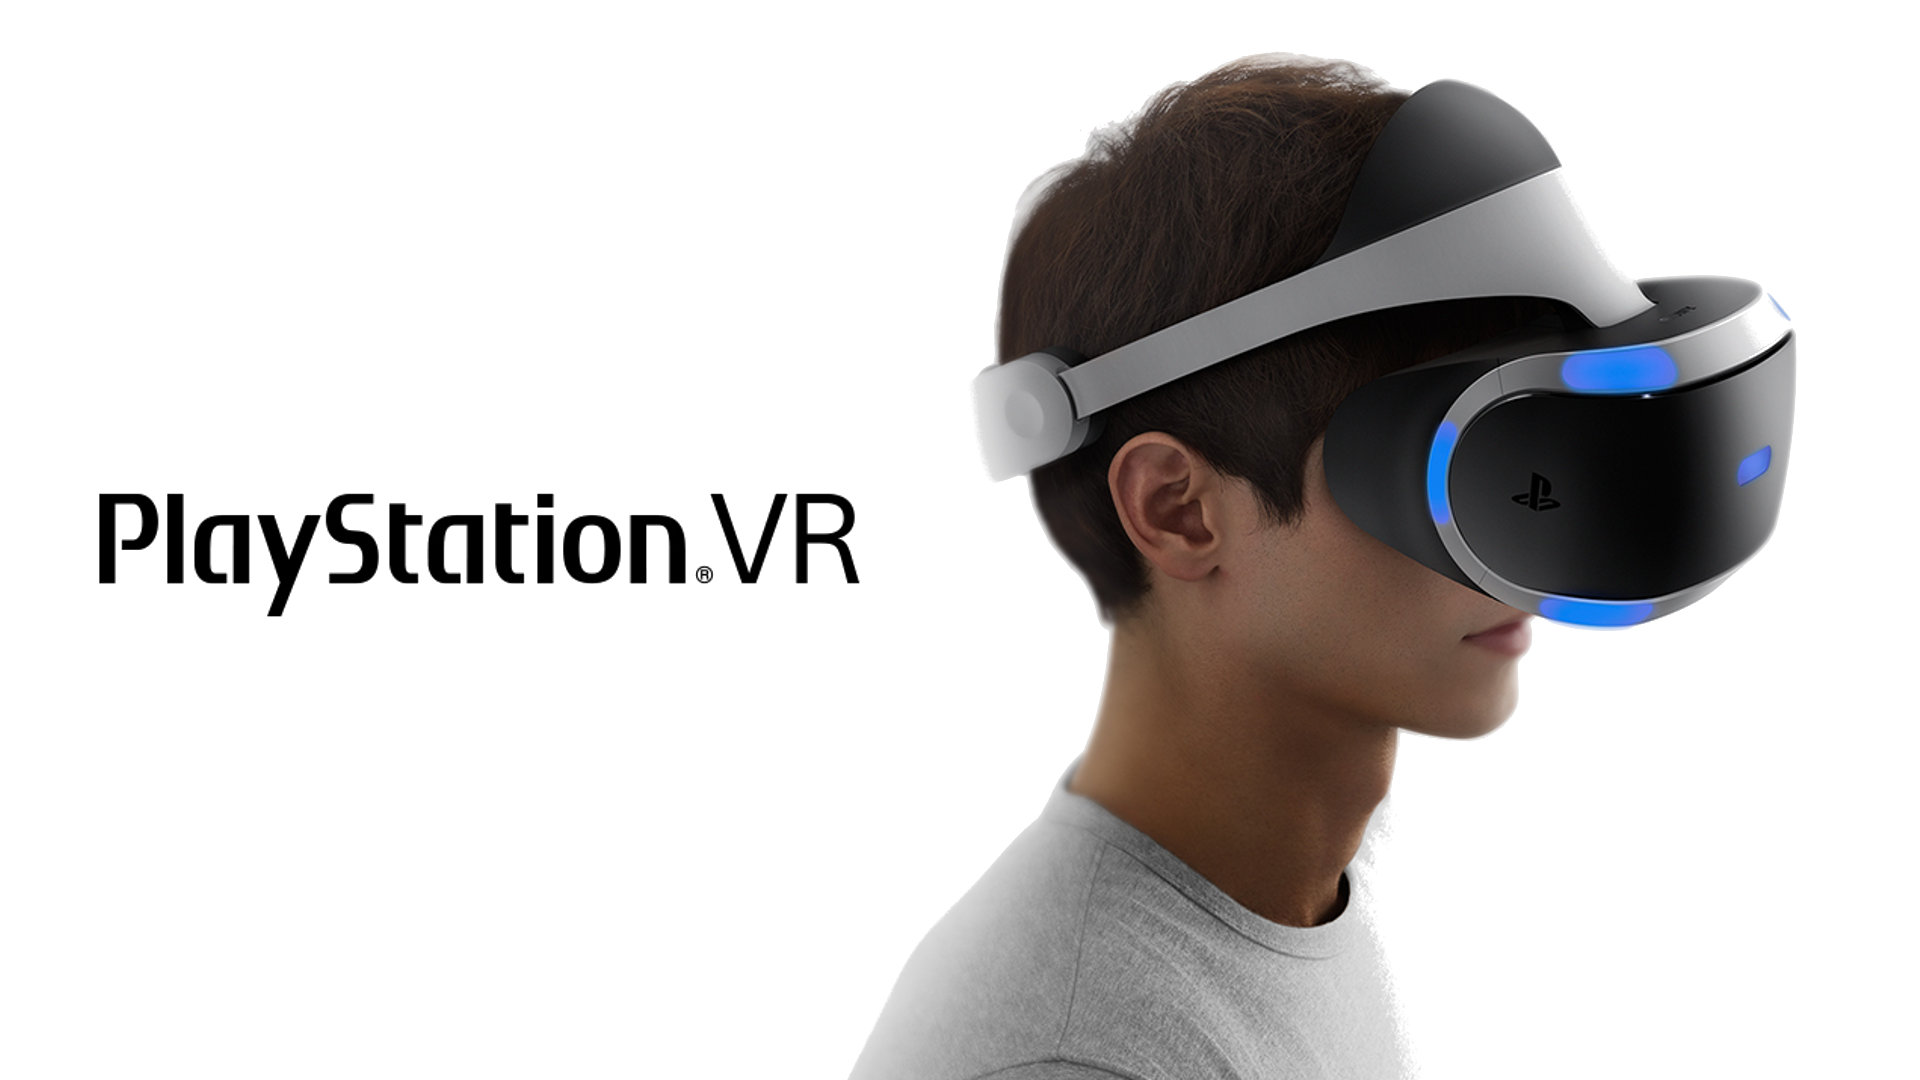 PlayStation VR is launching this autumn, according to GameStop CEO